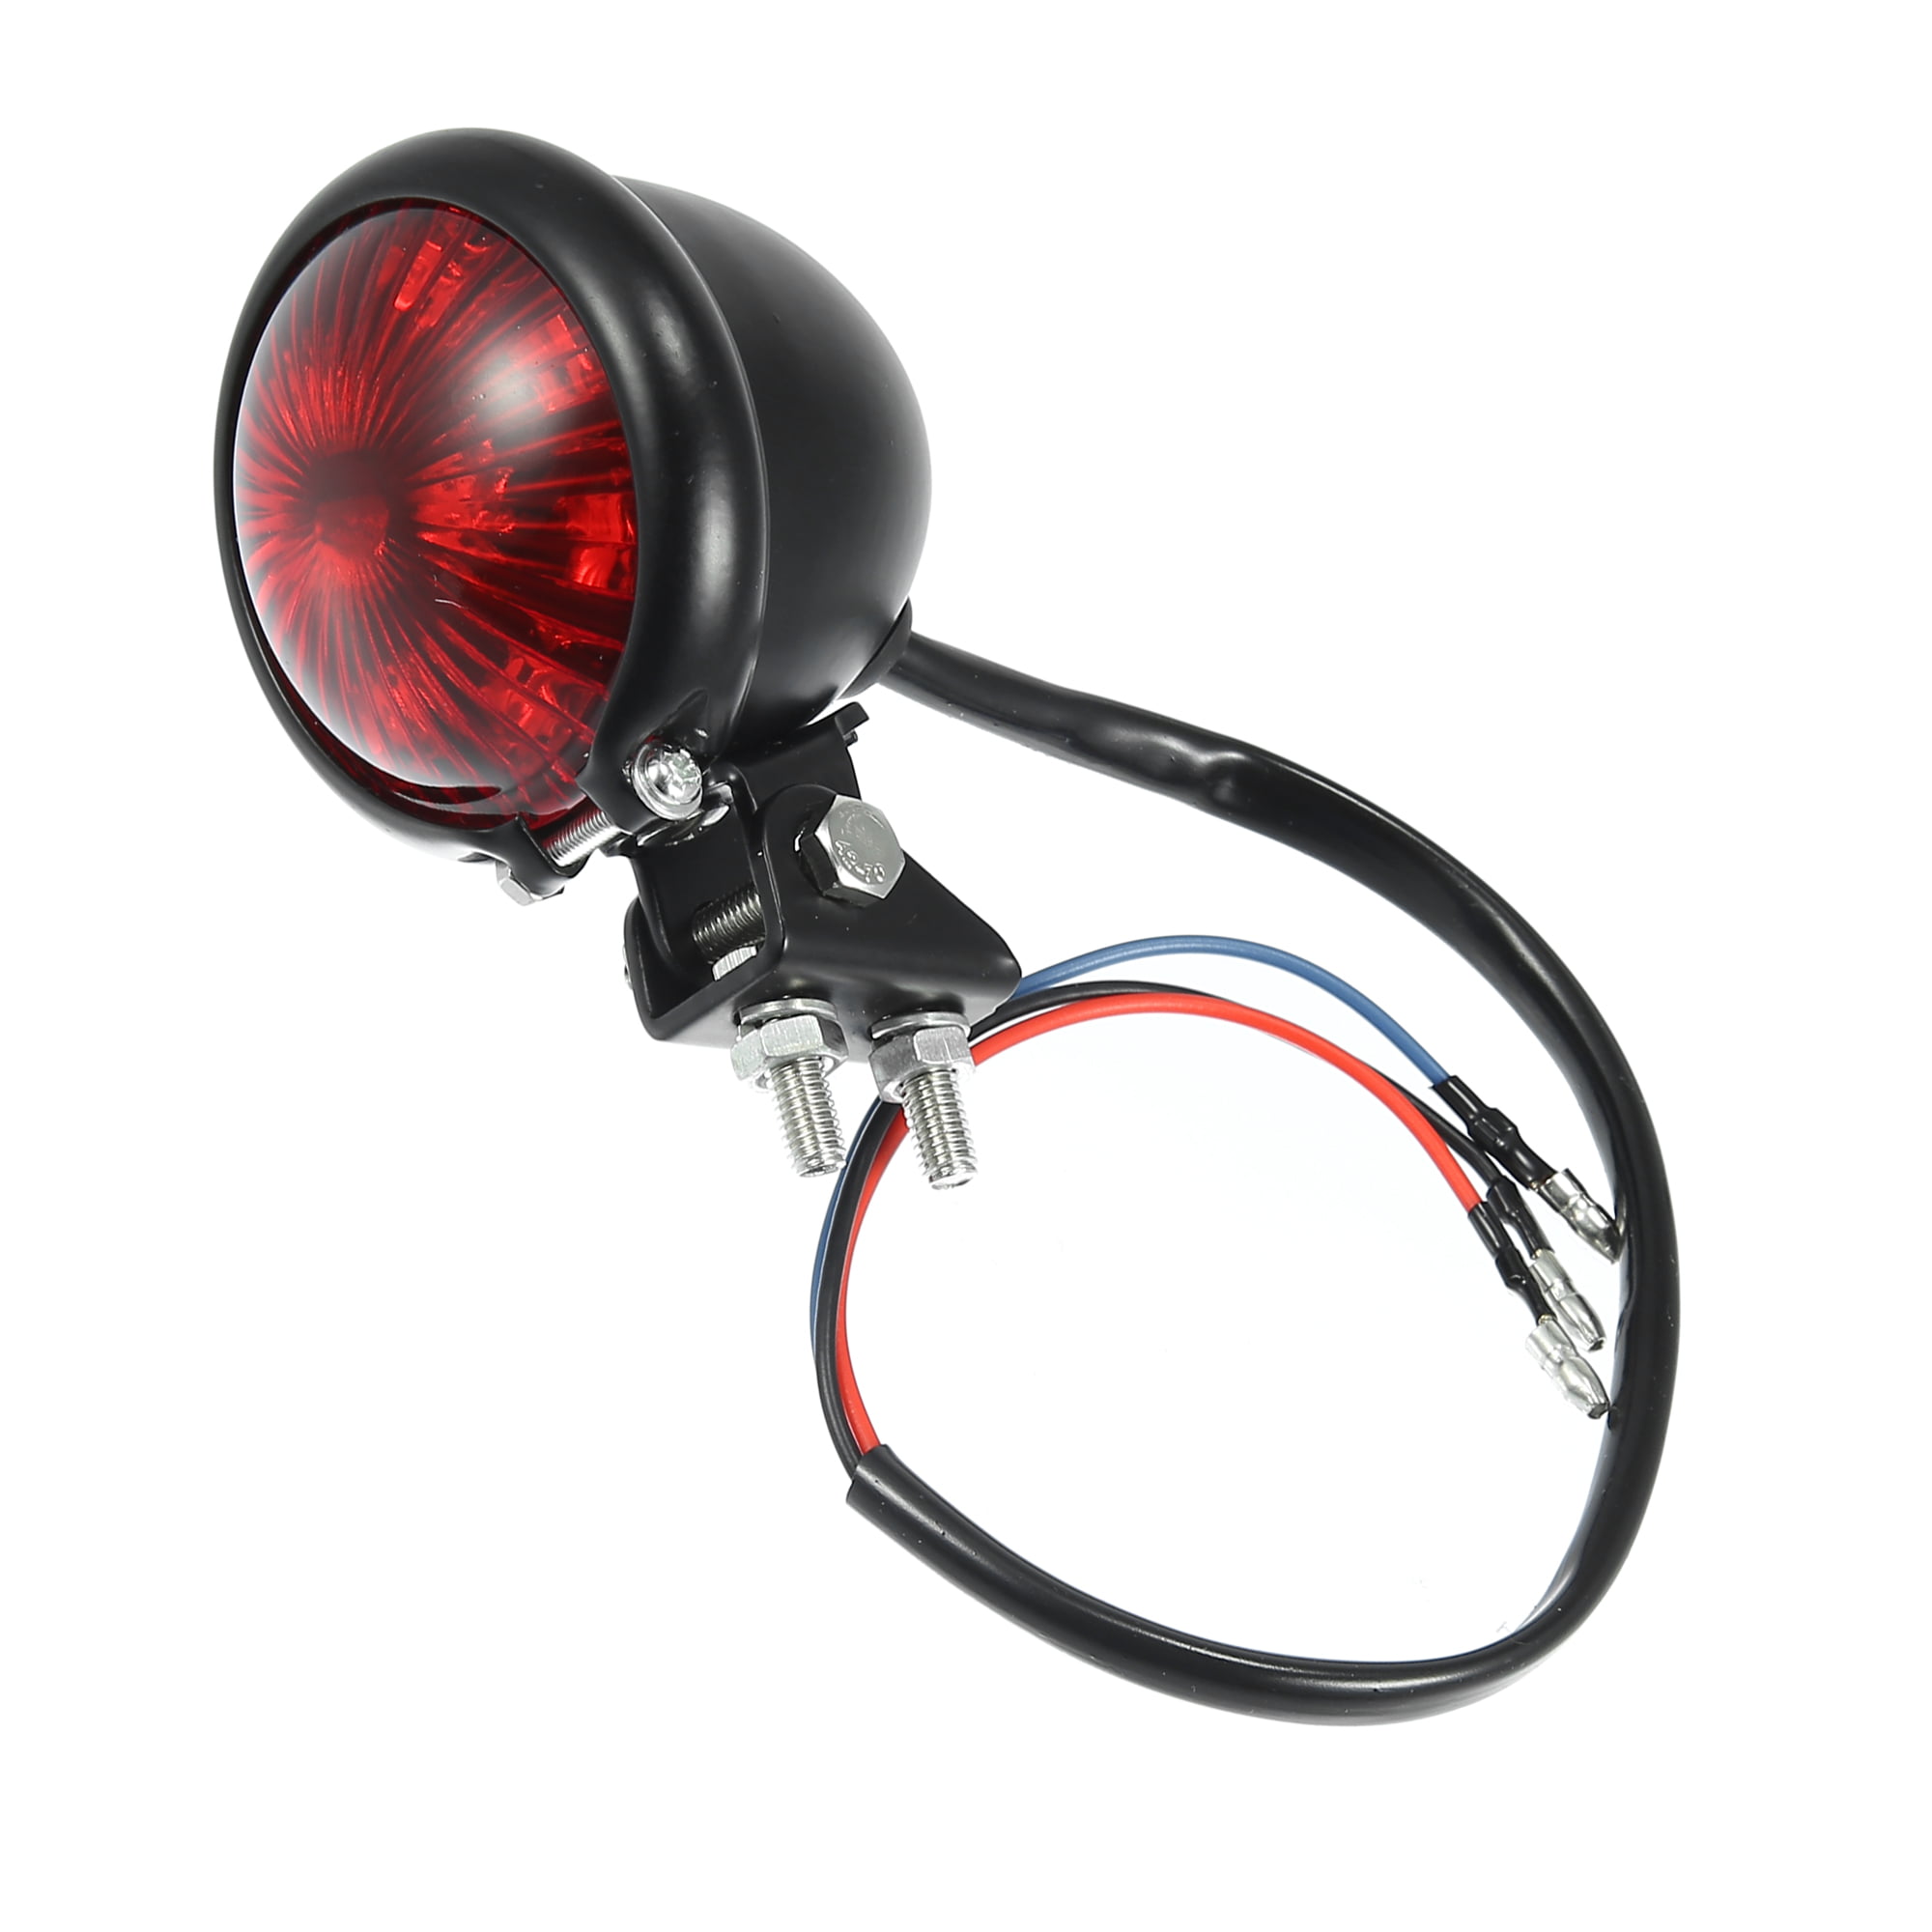 Black Rear LED Light Signal Tail Light 3 Wire Motorcycle Universal Fit for Harley for Bobber Walmart.com